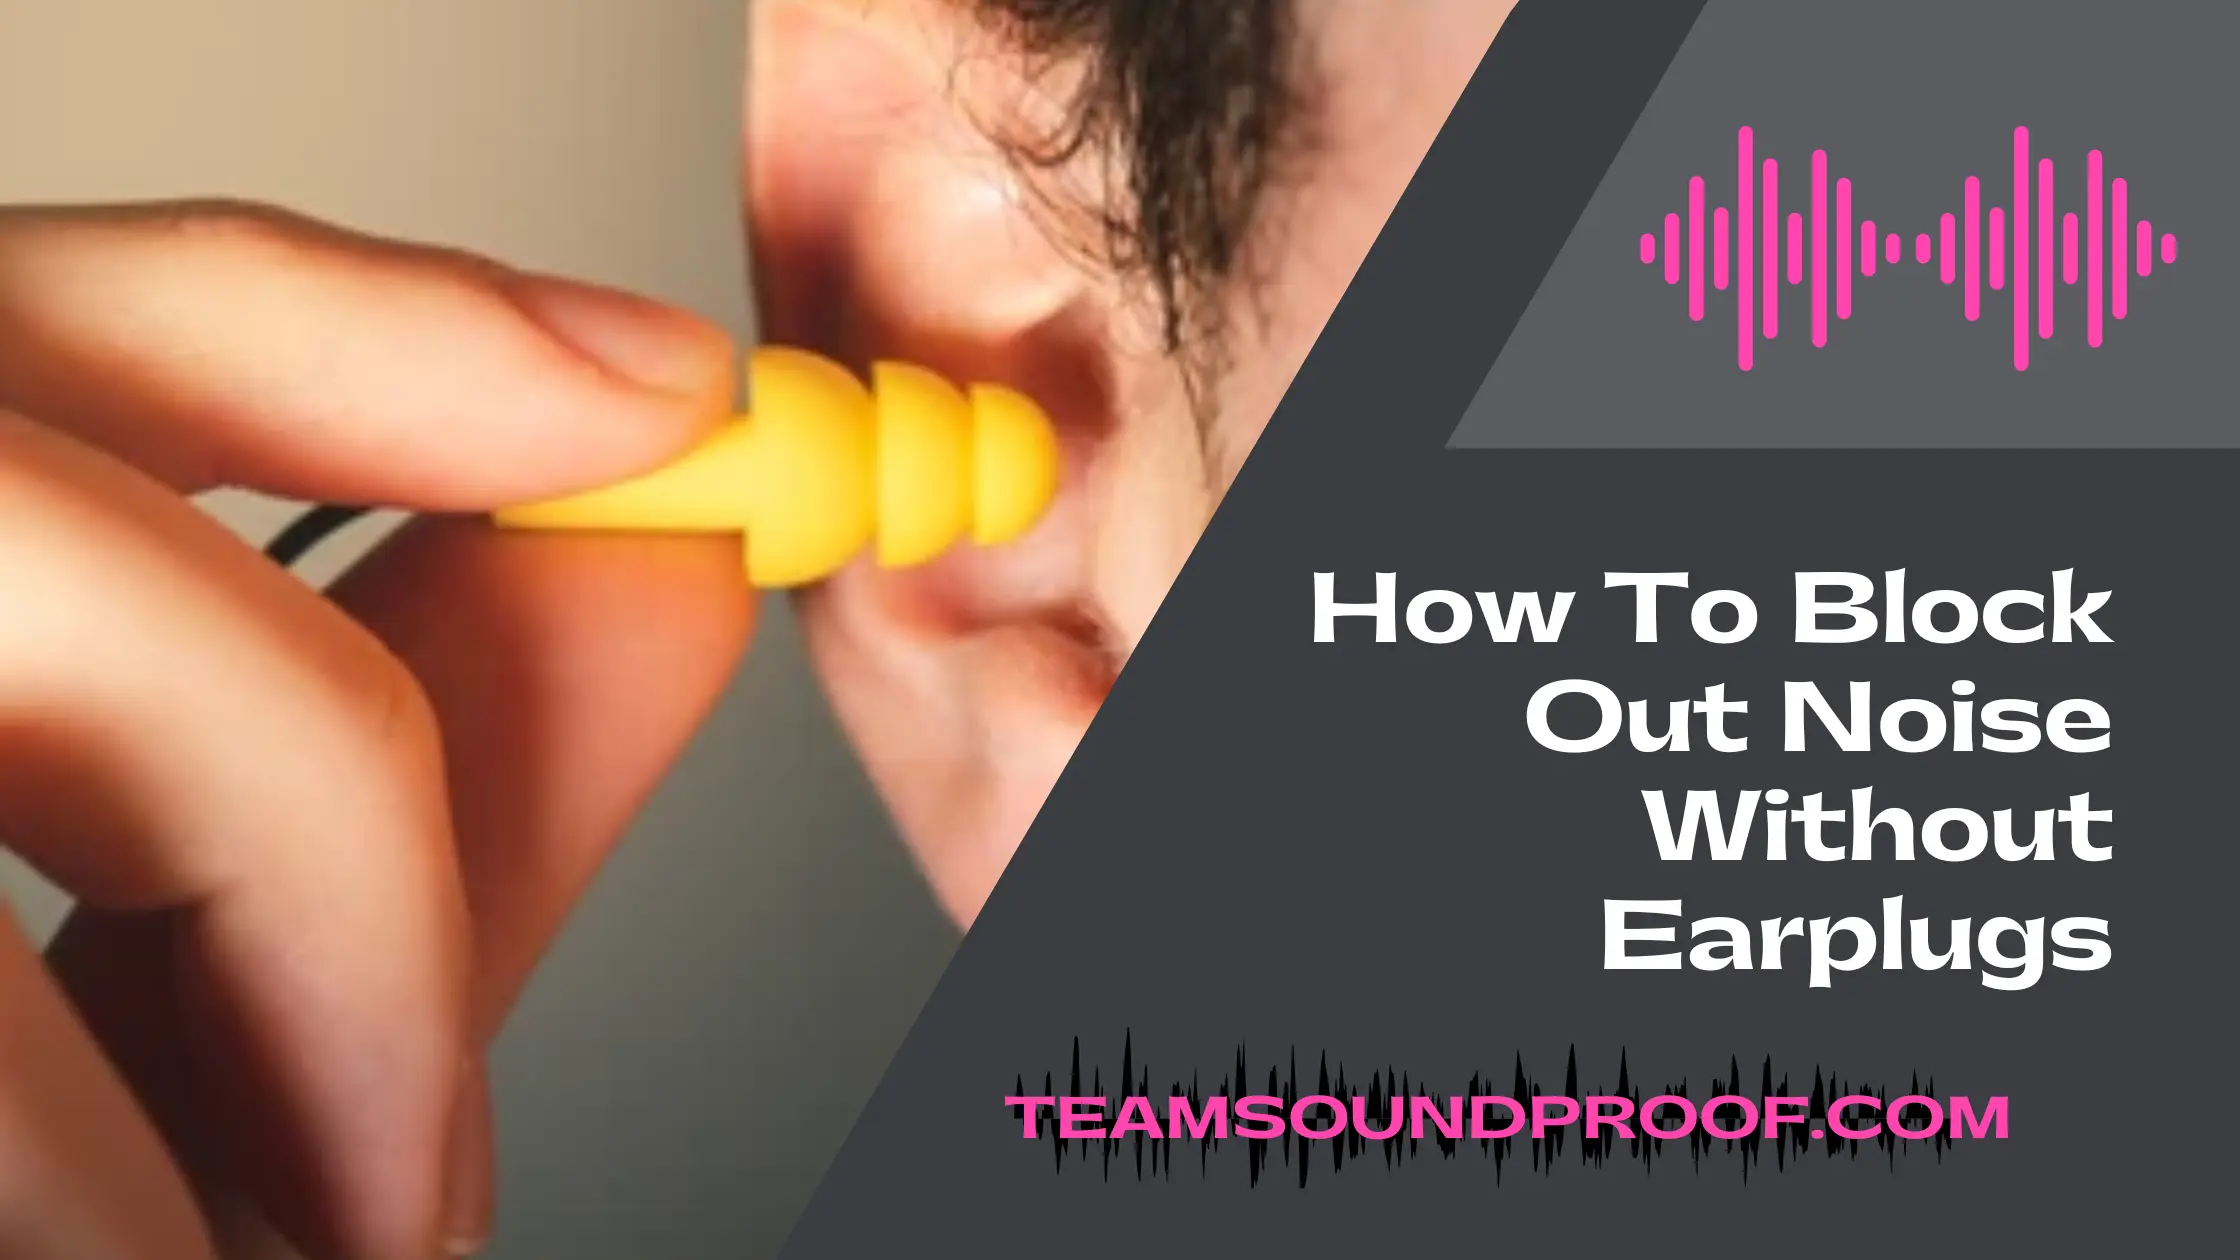 How To Block Out Noise Without Earplugs